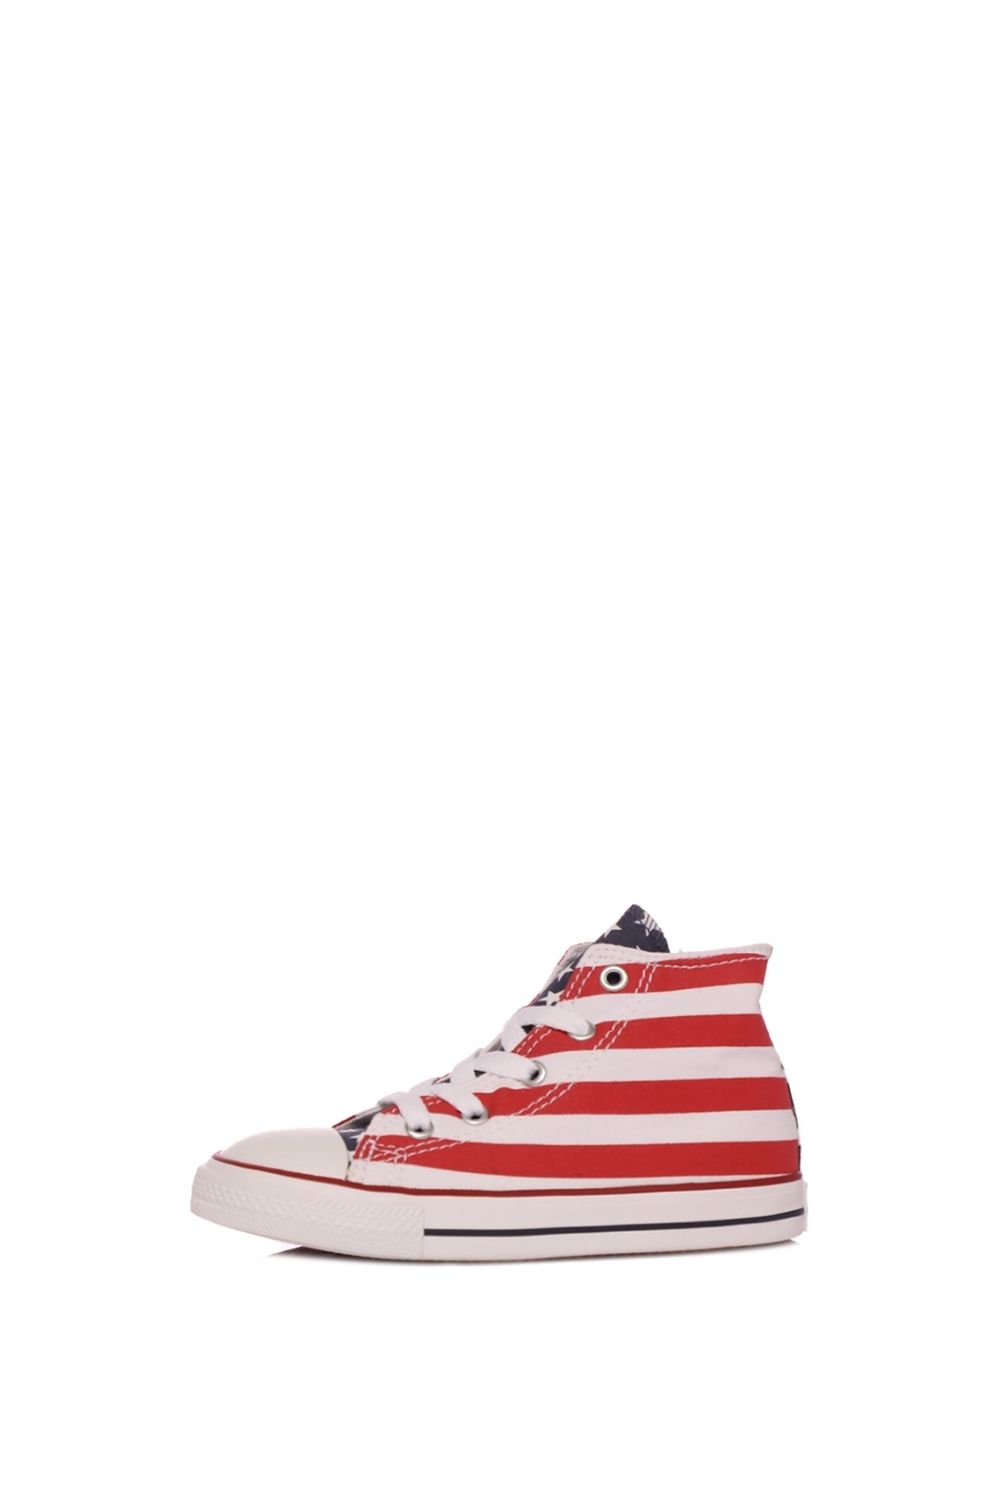 CONVERSE - Παιδικά sneakers CONVERSE Chuck Taylor All Star Print Hi λευκά κόκκινα Παιδικά/Baby/Παπούτσια/Sneakers